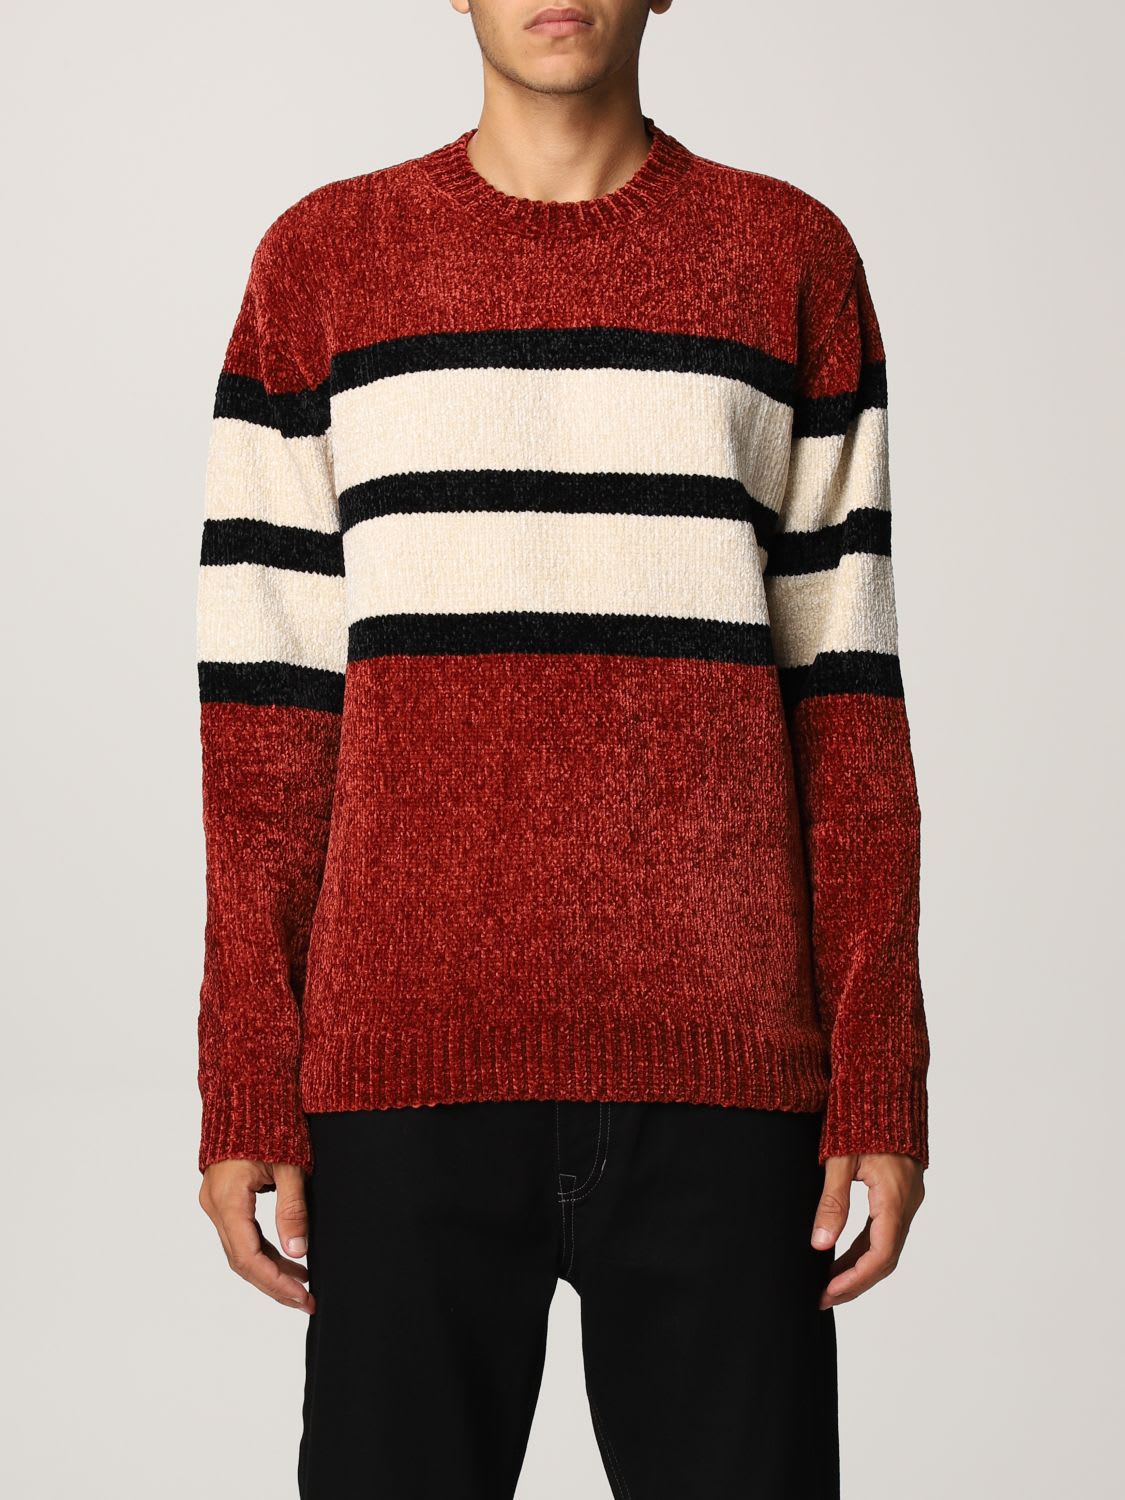 Emporio Armani Sweater Emporio Armani Sweater In Color Block Terry